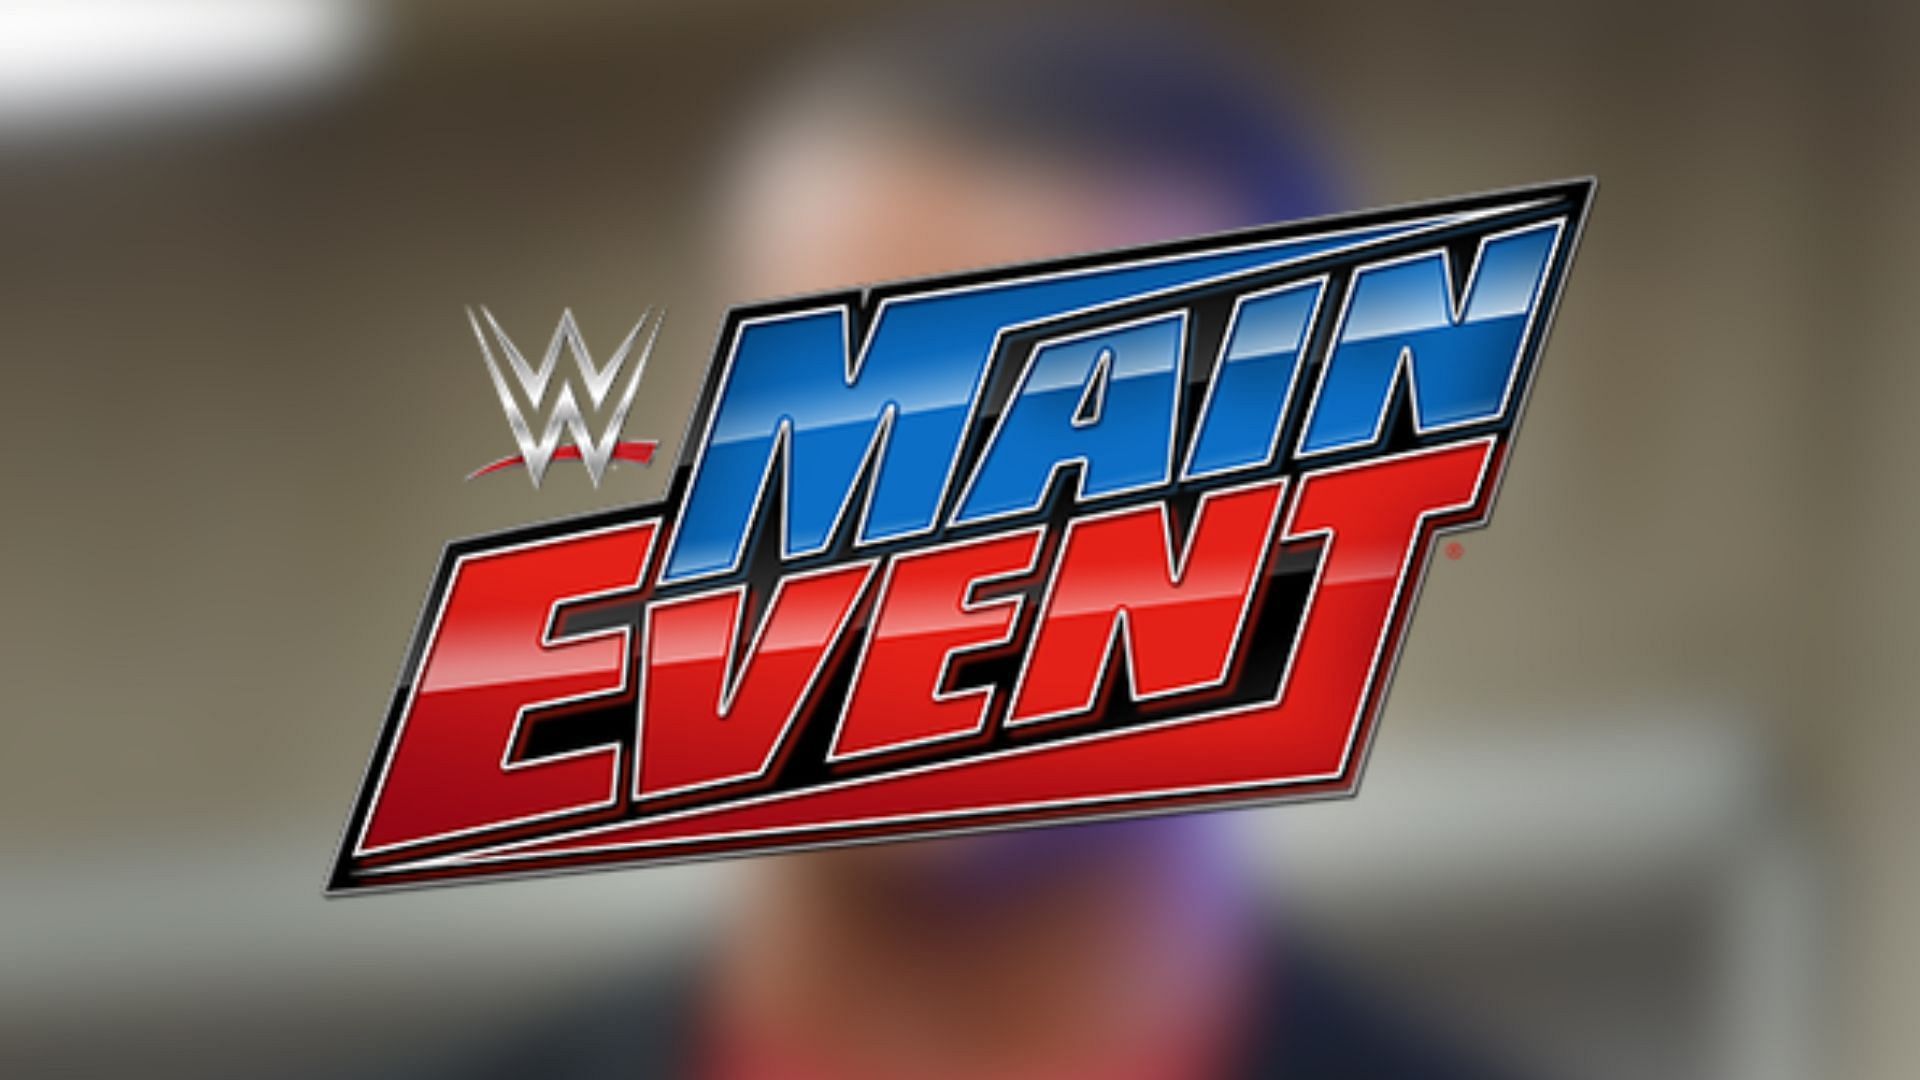 WWE Main Event streams new episodes on Hulu on Thursdays.